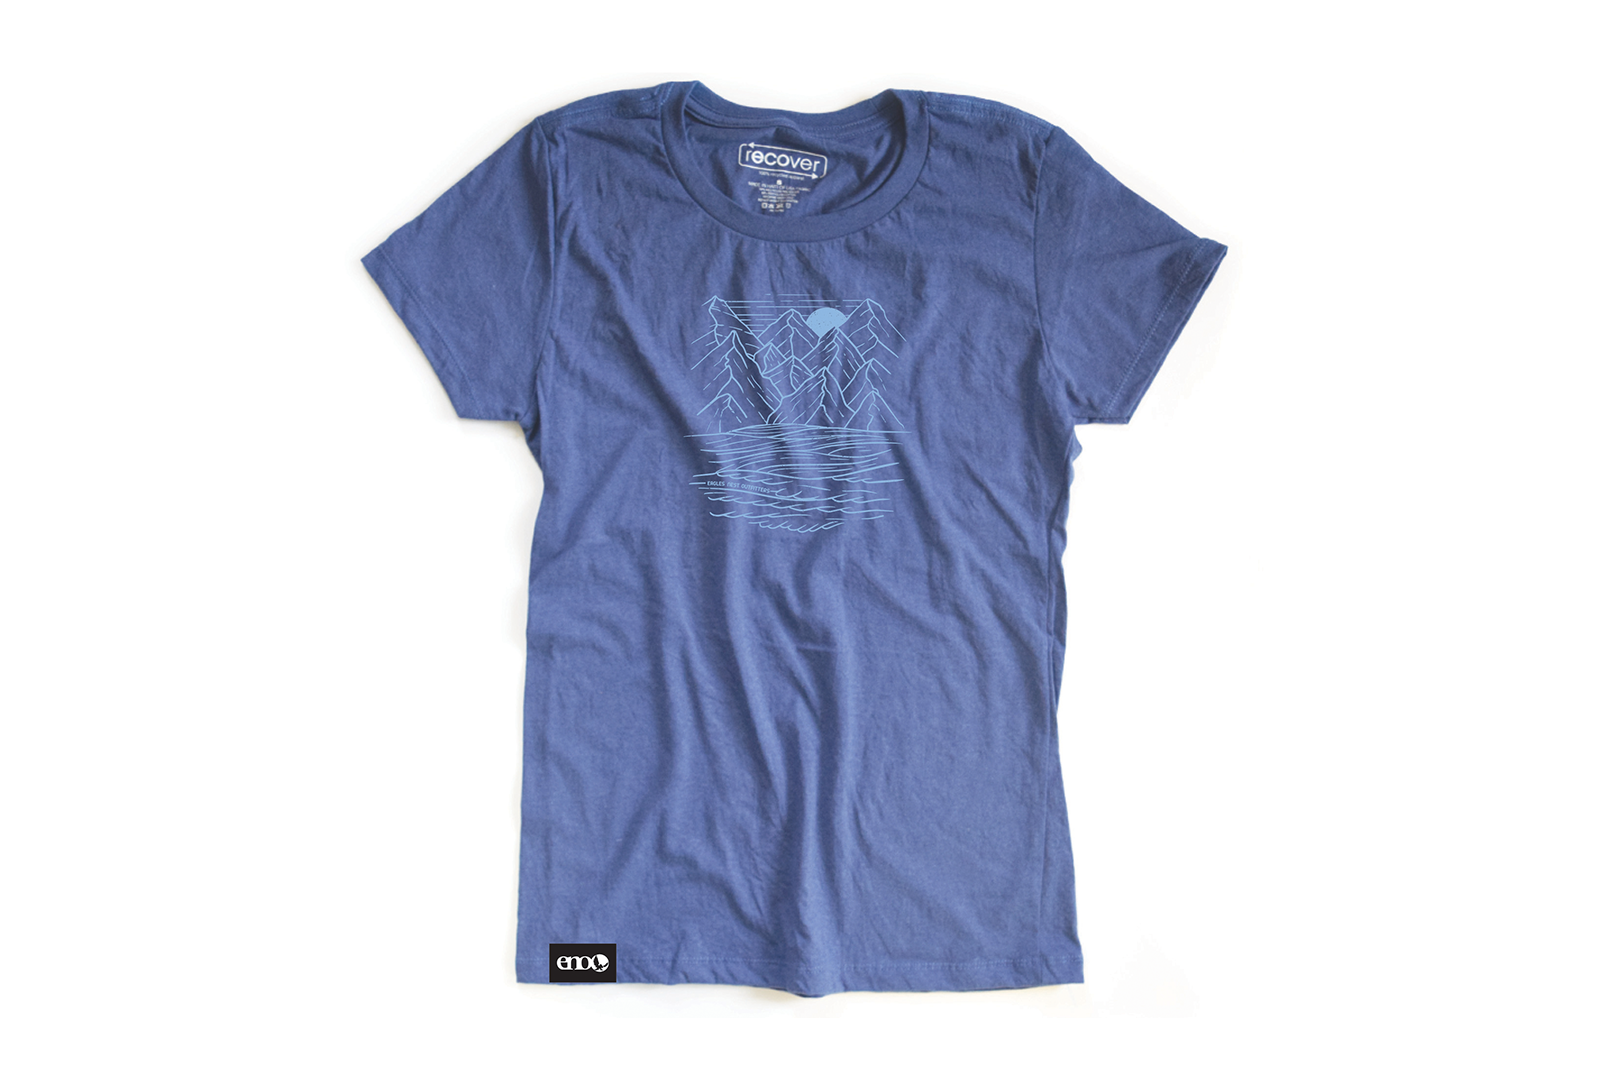 Eagles Nest Outfitters, Inc. Apparel & Merch, ENO Women's Mountain to Sea Tee